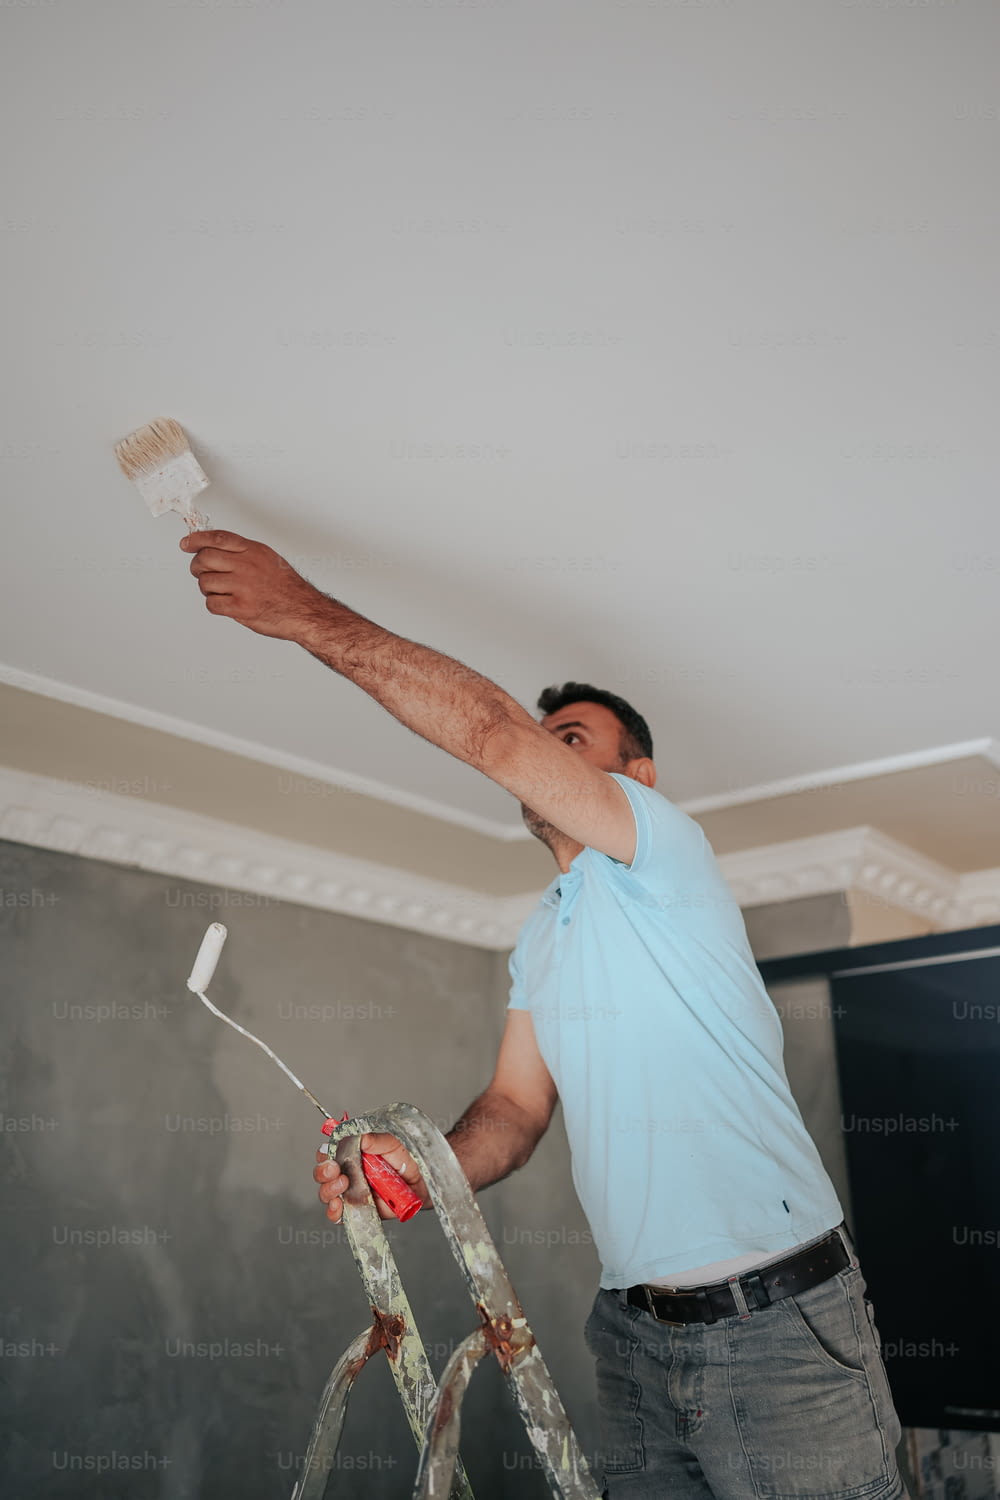 a man is painting a ceiling with a paint roller